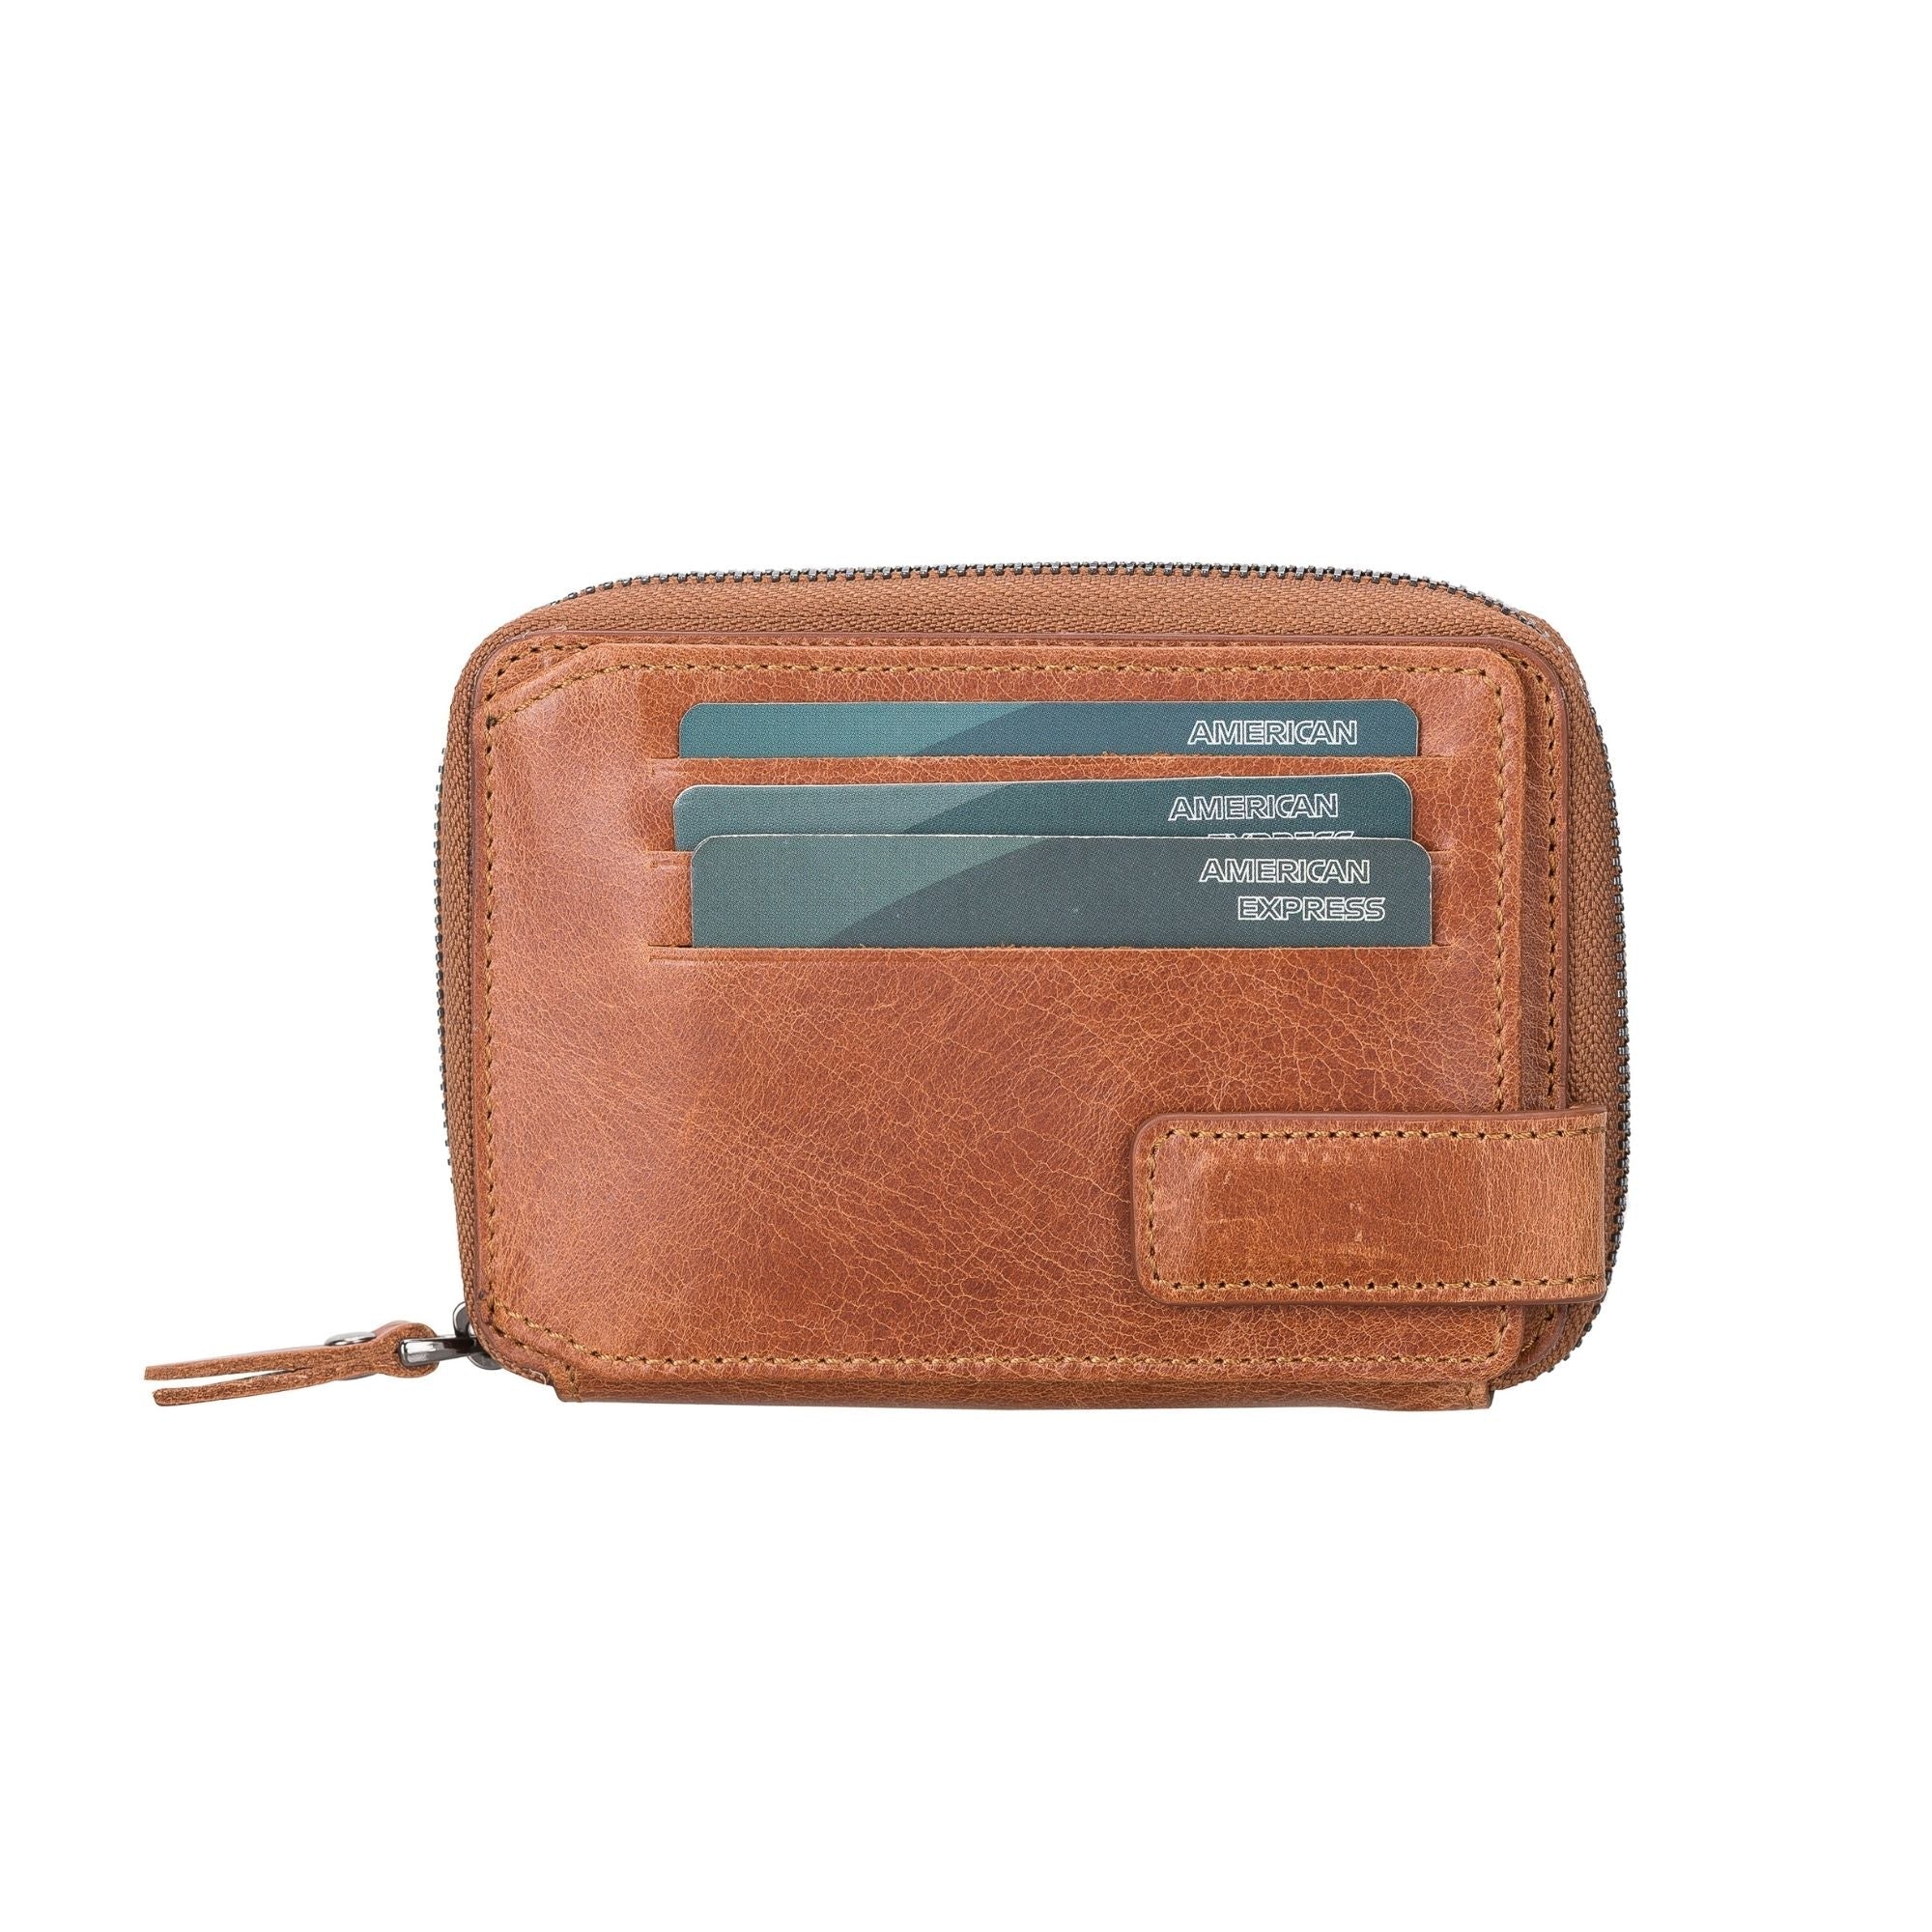 Powell Handmade Unisex Leather Wallet with Zippered Compartment - Tan - TORONATA